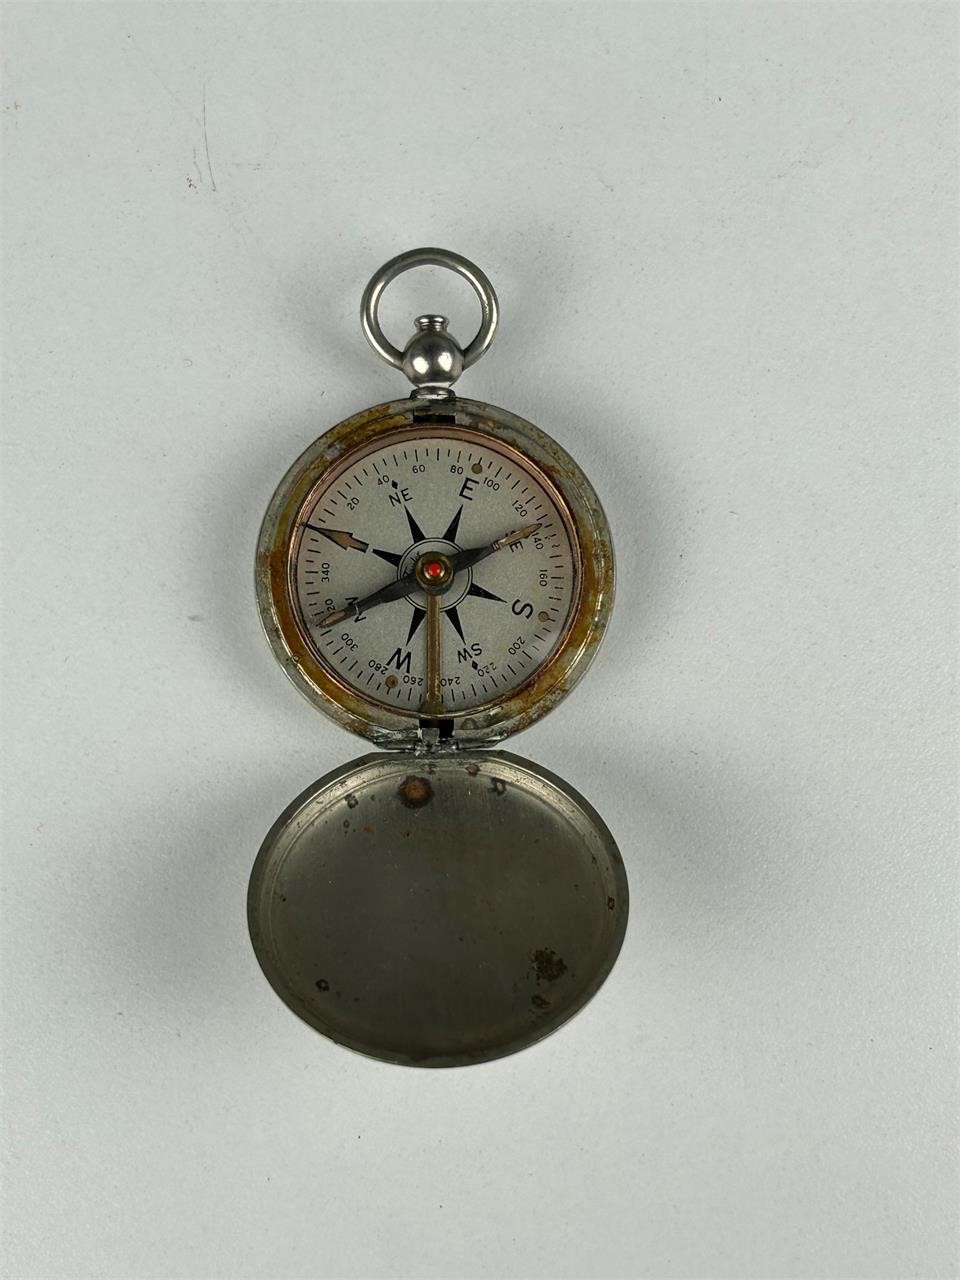 Vintage pocket watch style compass